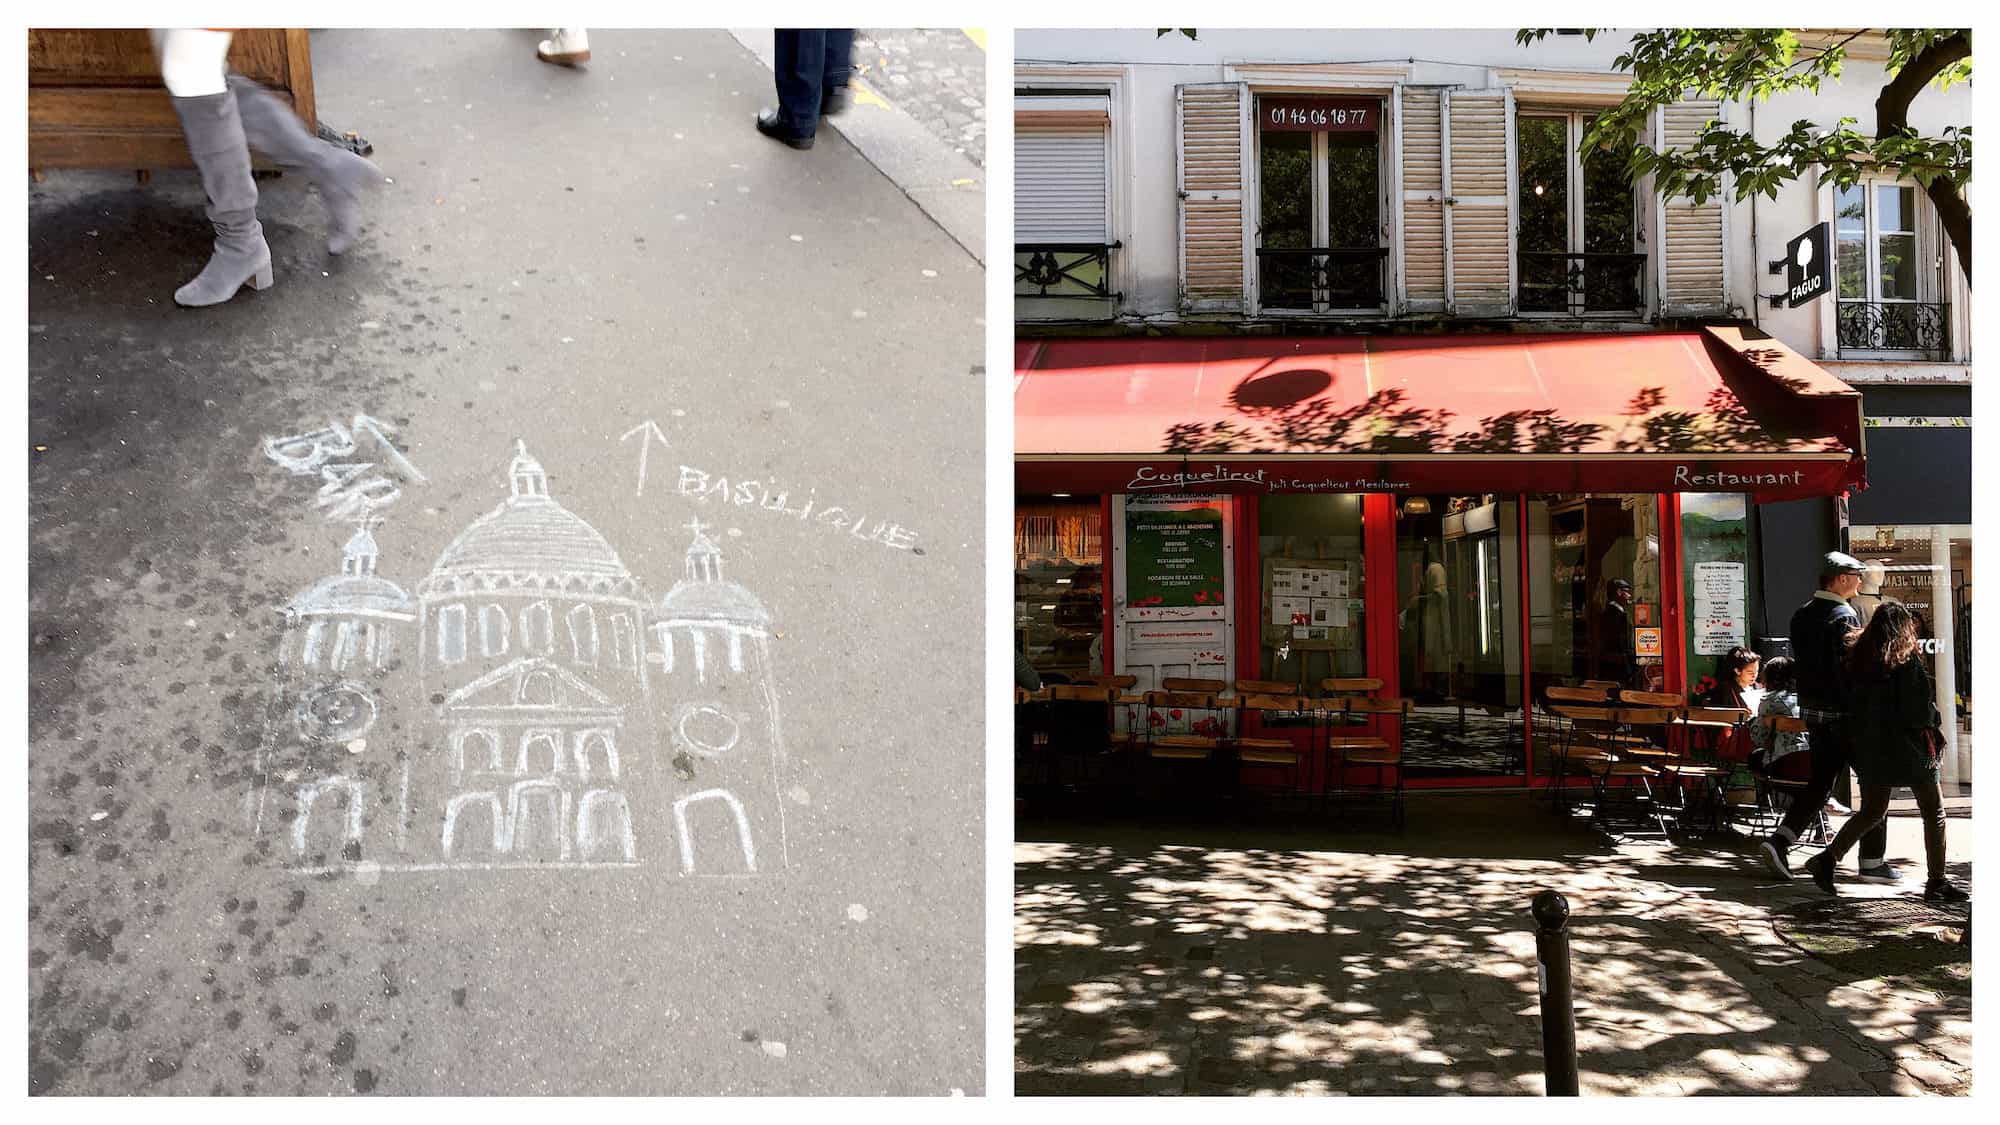 A chalk drawing of the Sacré Coeur Basilica in Montmartre on a sidewalk in Paris (left). A quaint bistro lined by a terrace on a tree-lined square in Paris in summer (right).